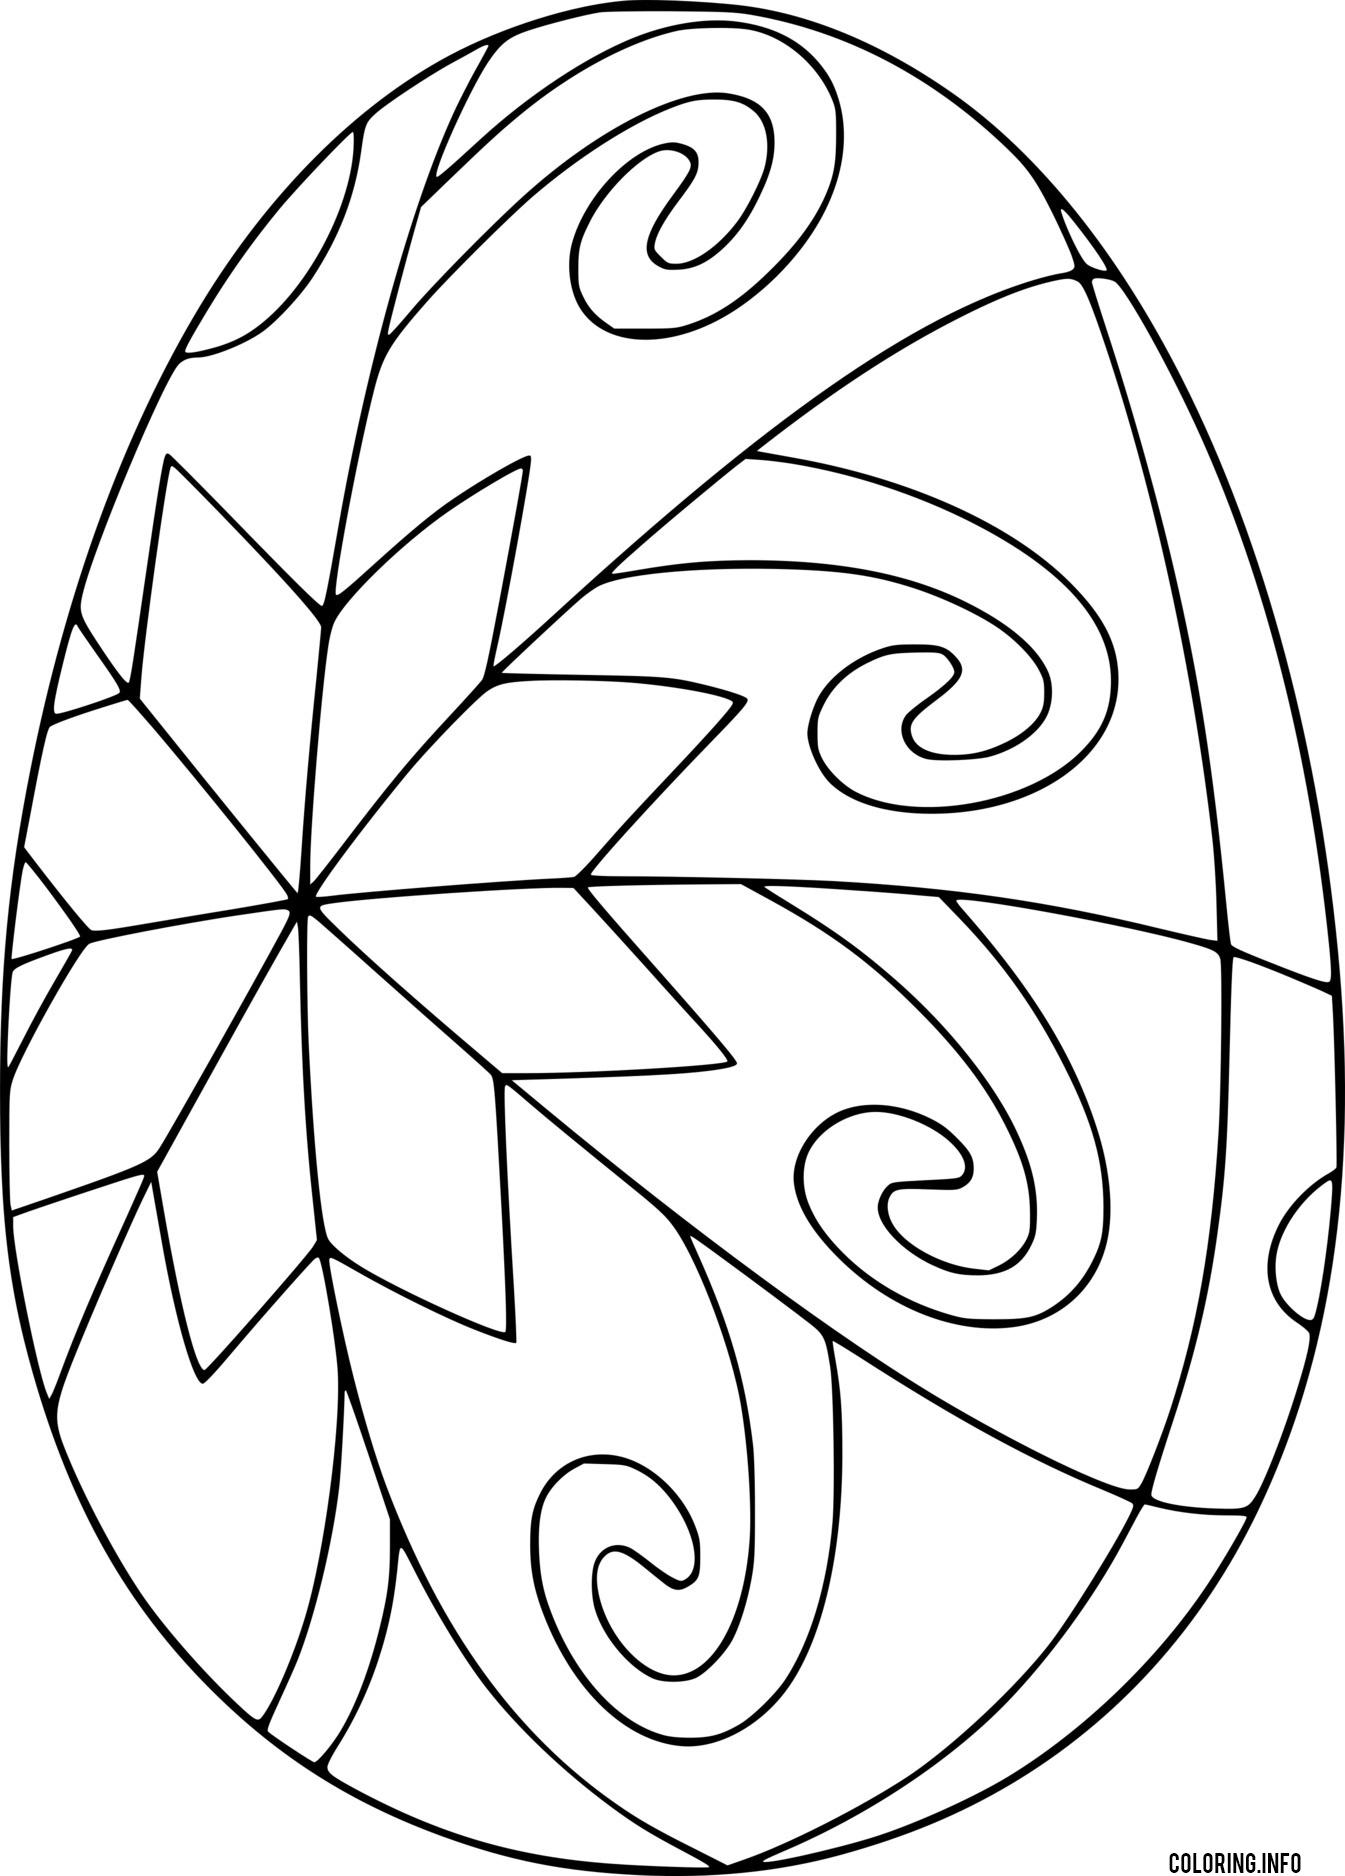 Easter Egg With Eight Pointed Star coloring